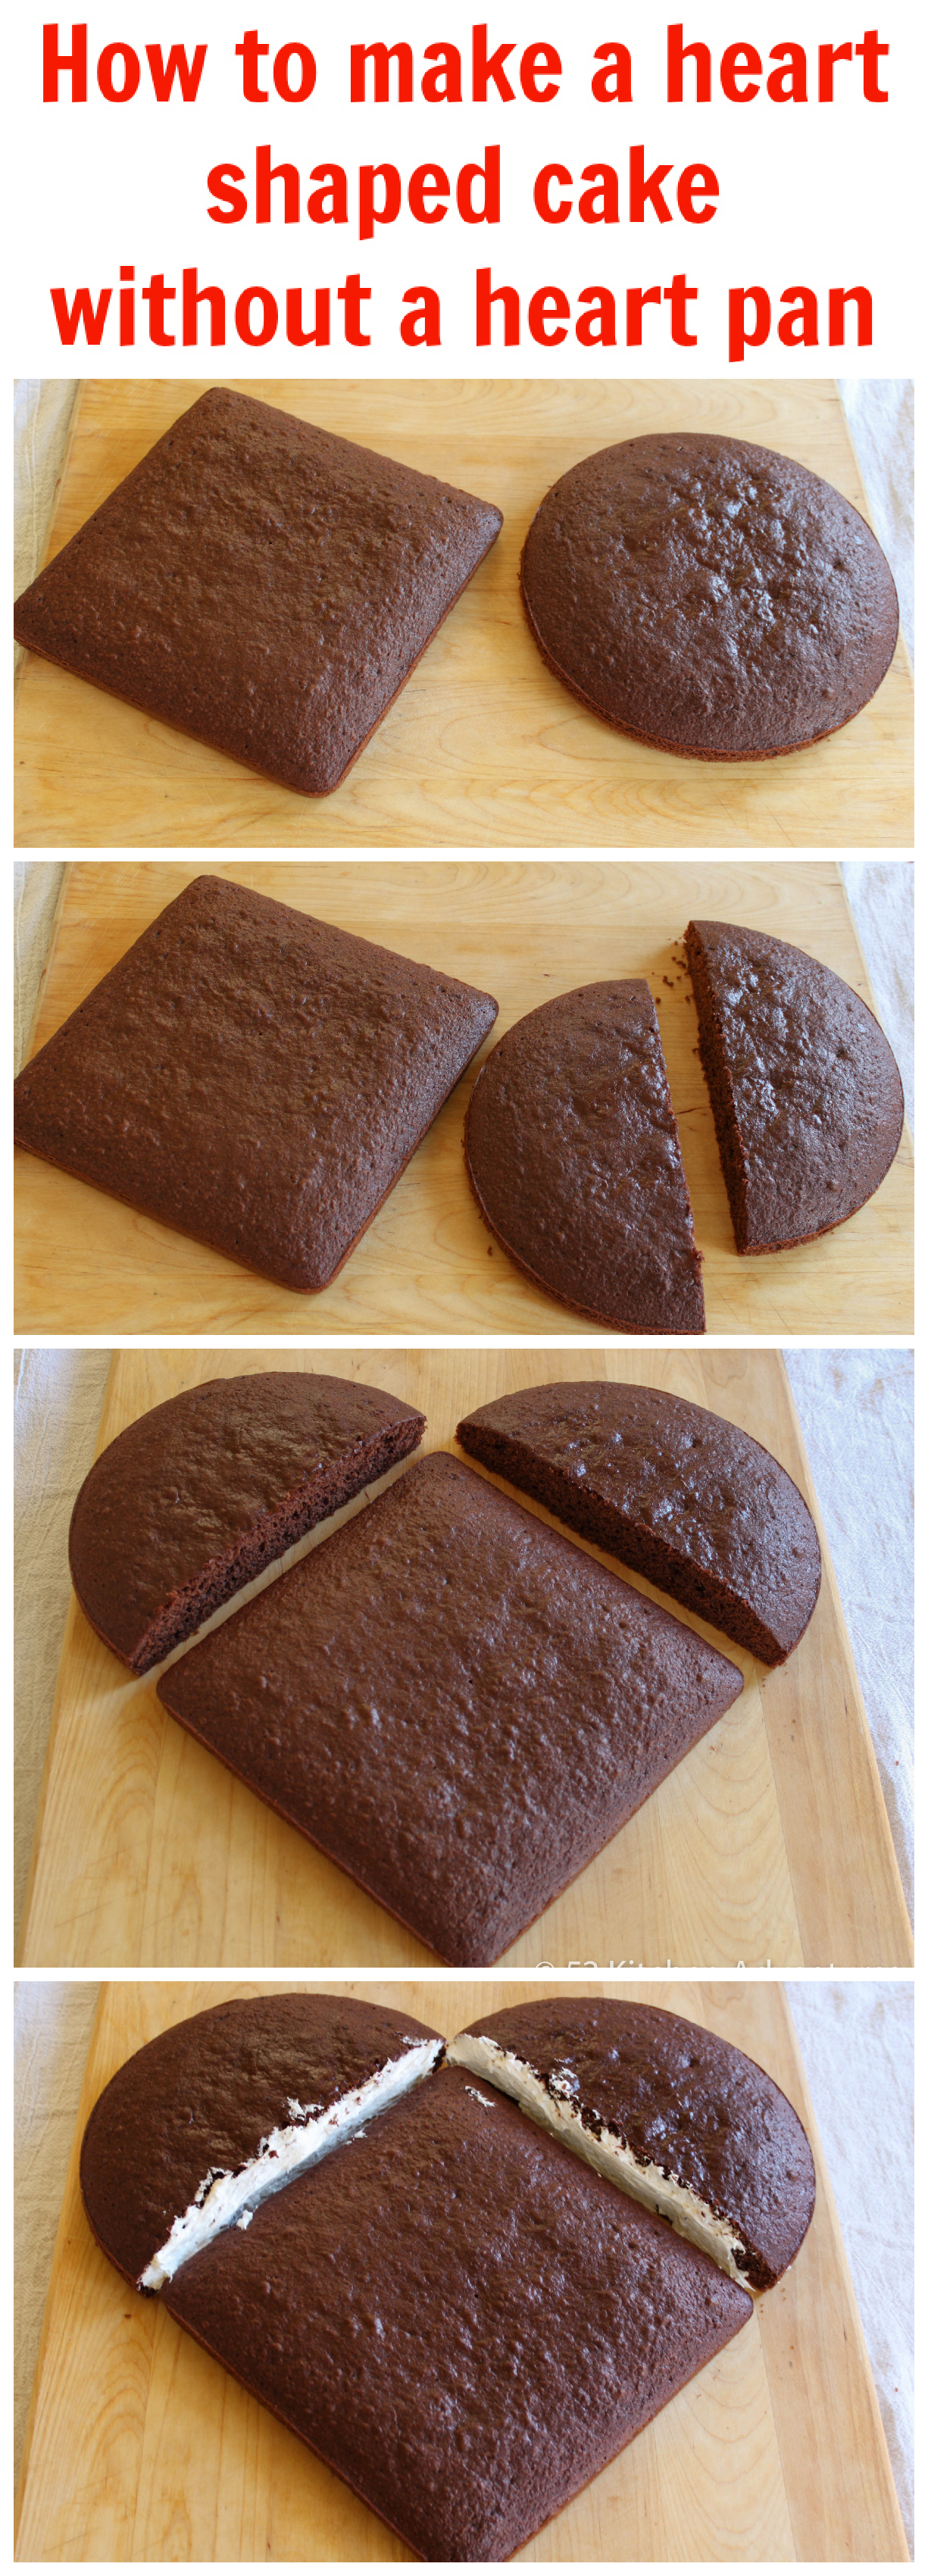 http://www.52kitchenadventures.com/wp-content/uploads/2013/02/Steps-how-to-make-a-heart-shaped-cake-without-a-cake-pan.jpg